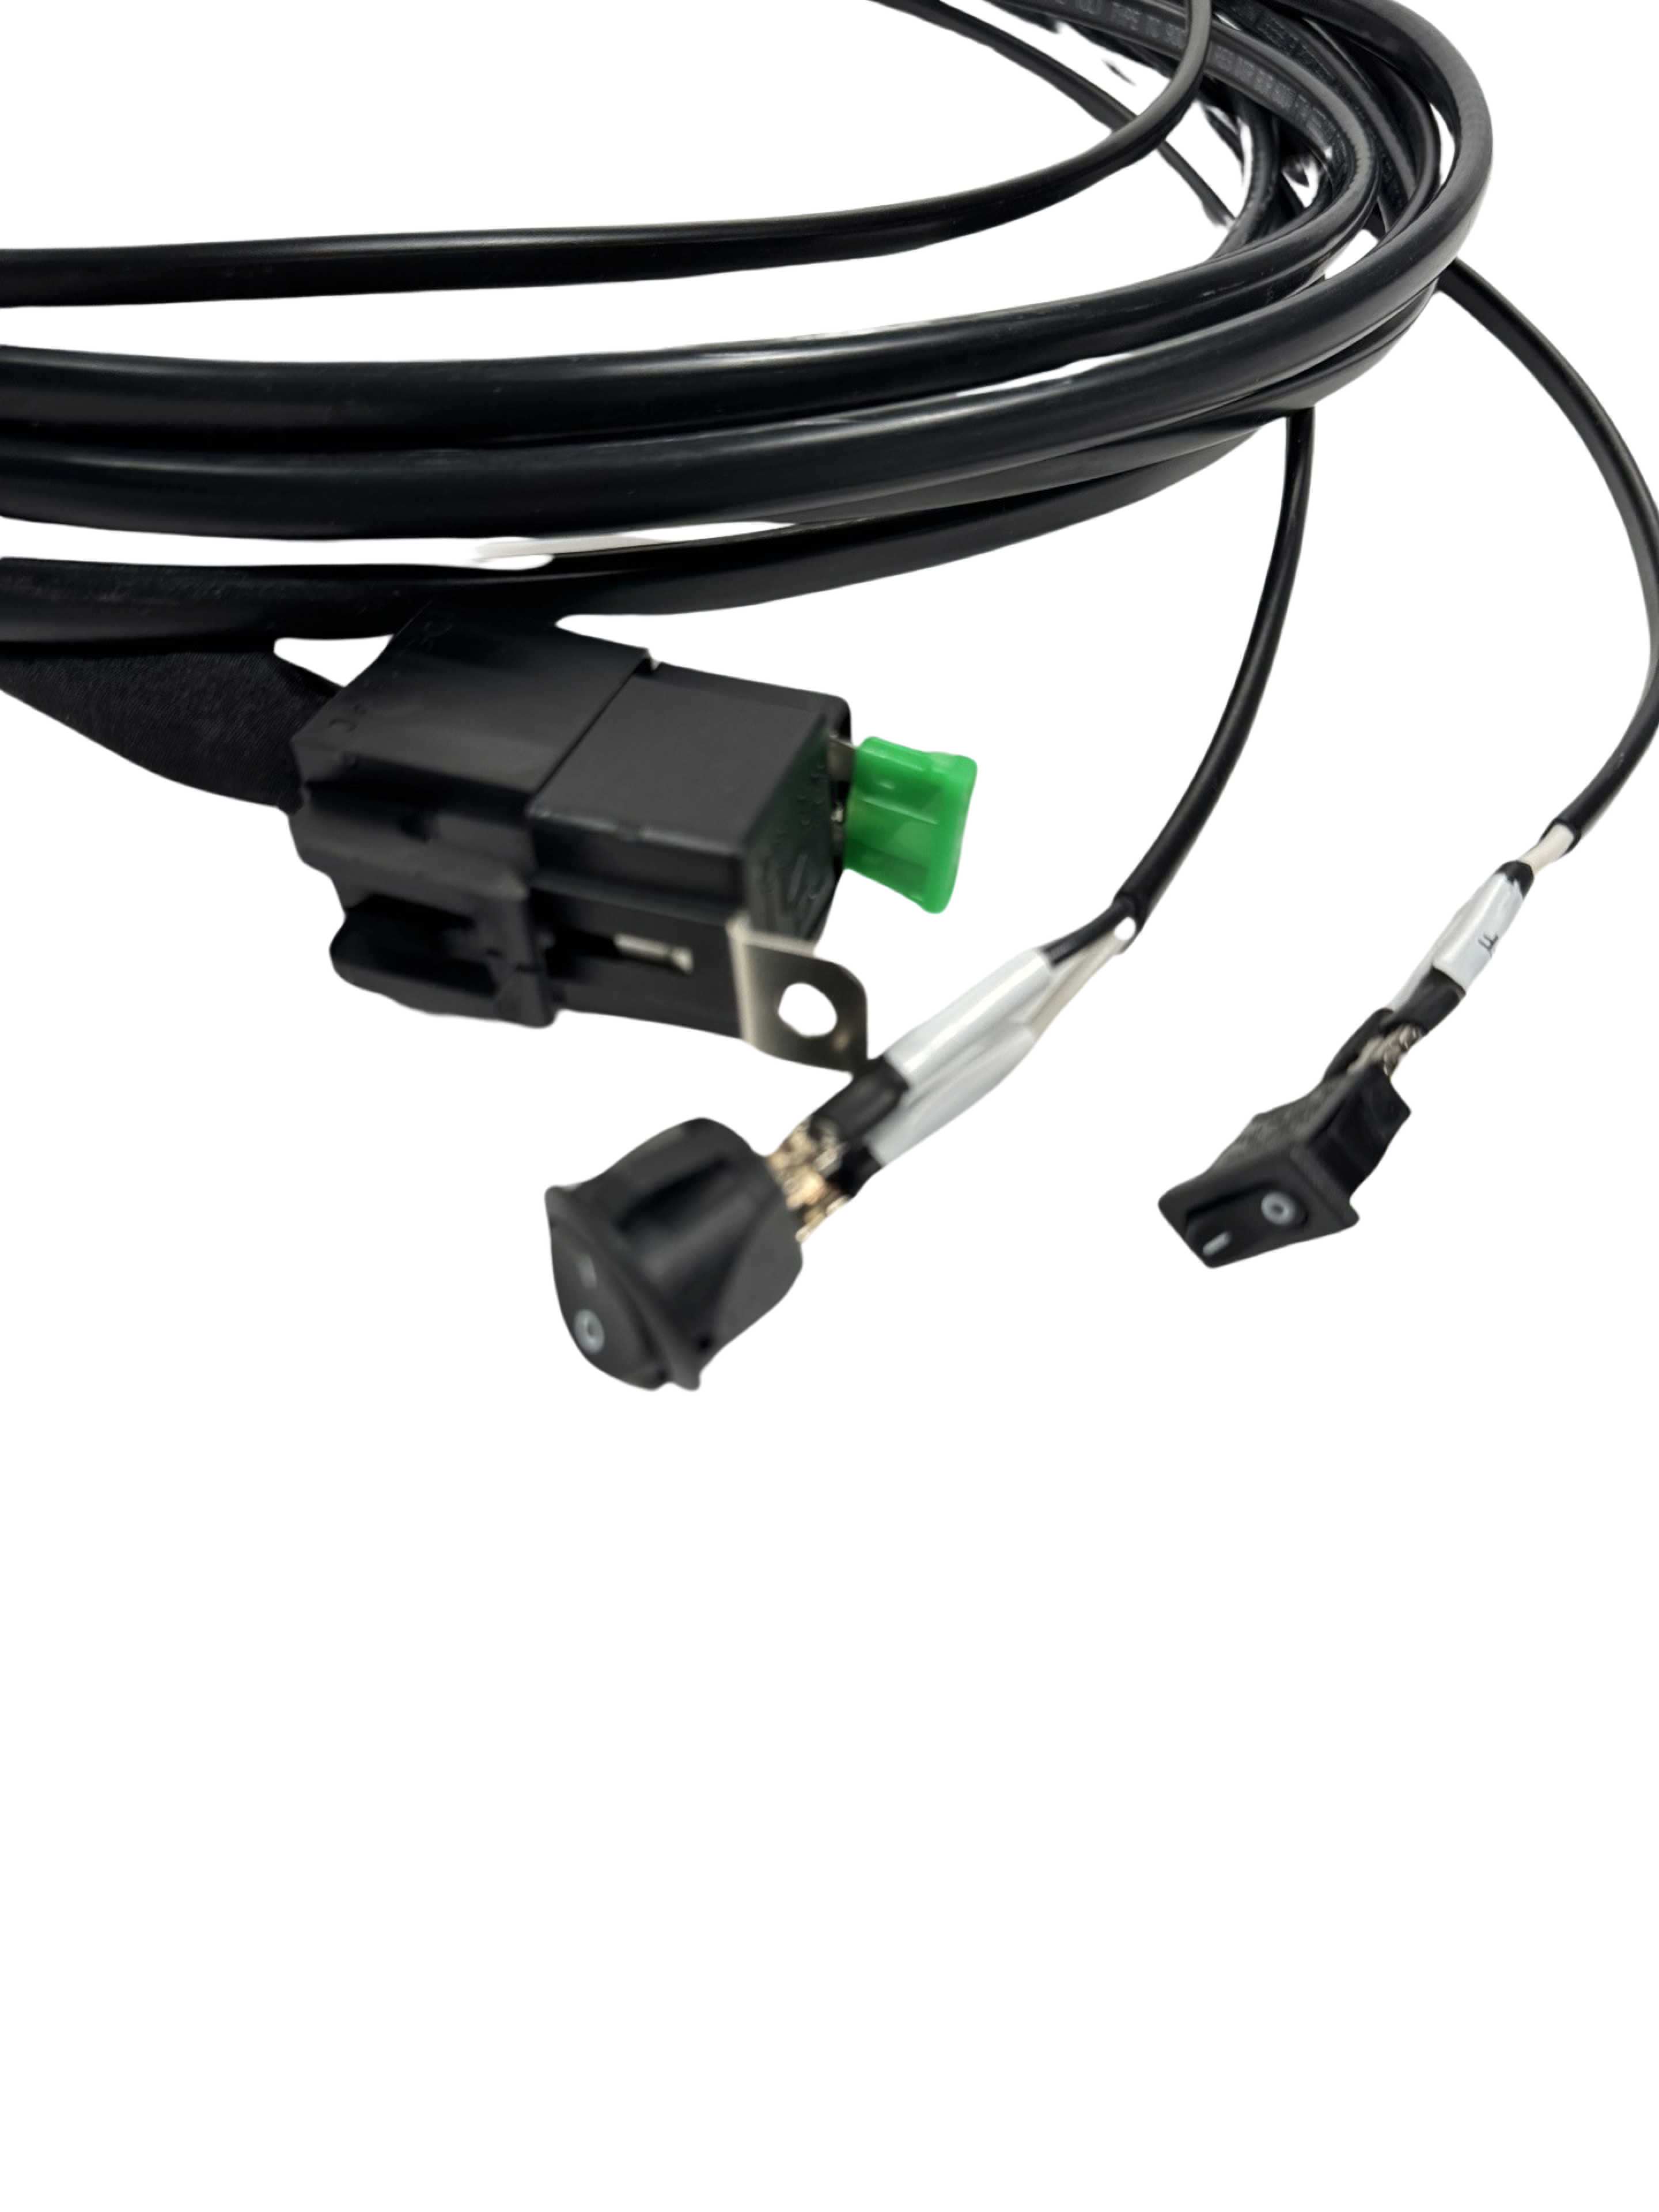 Rock Light Dual Relay, Dual Switched Battery Power Harness 12awg